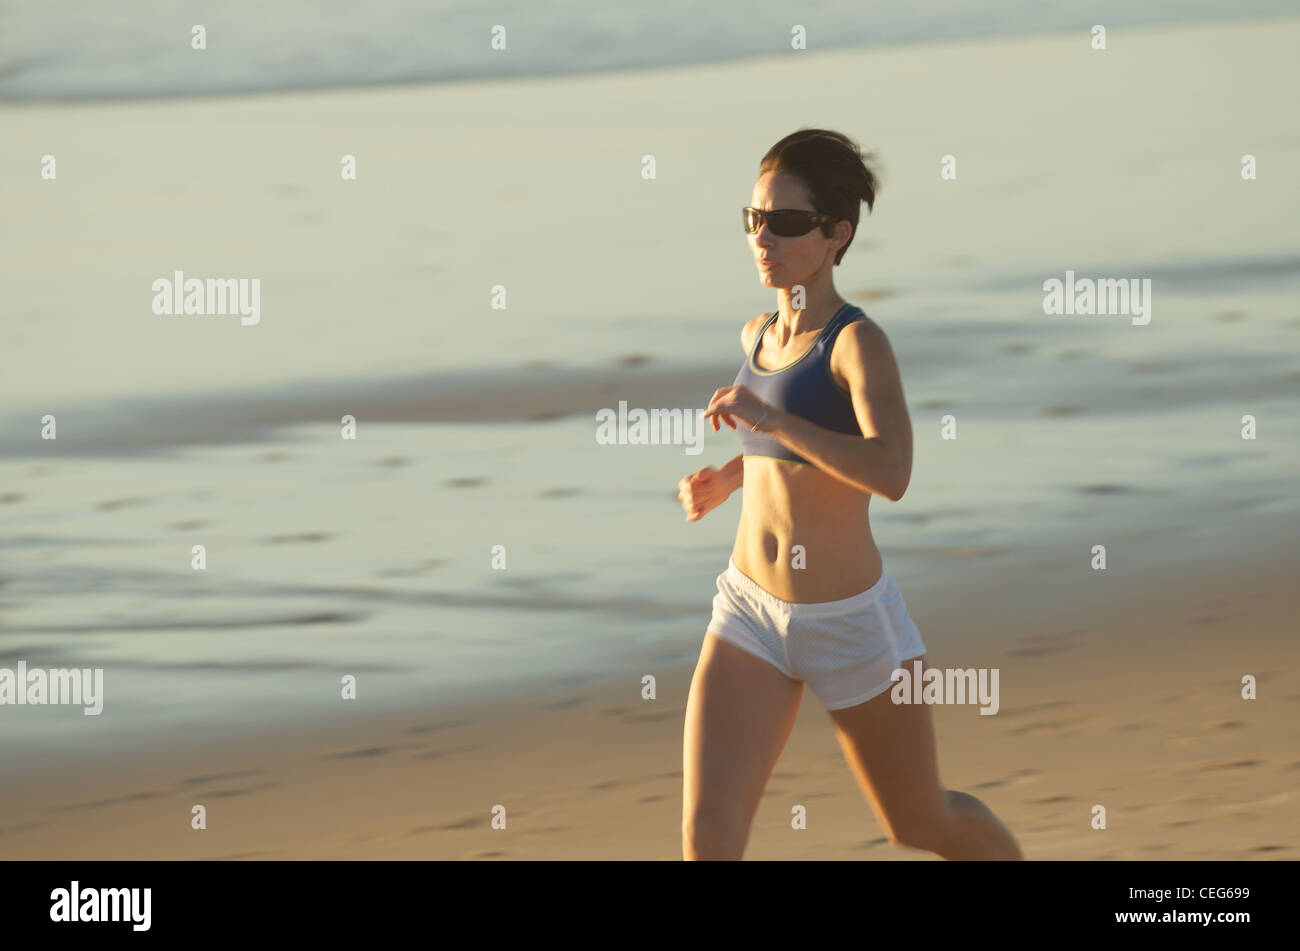 A woman running on the beach. Stock Photo